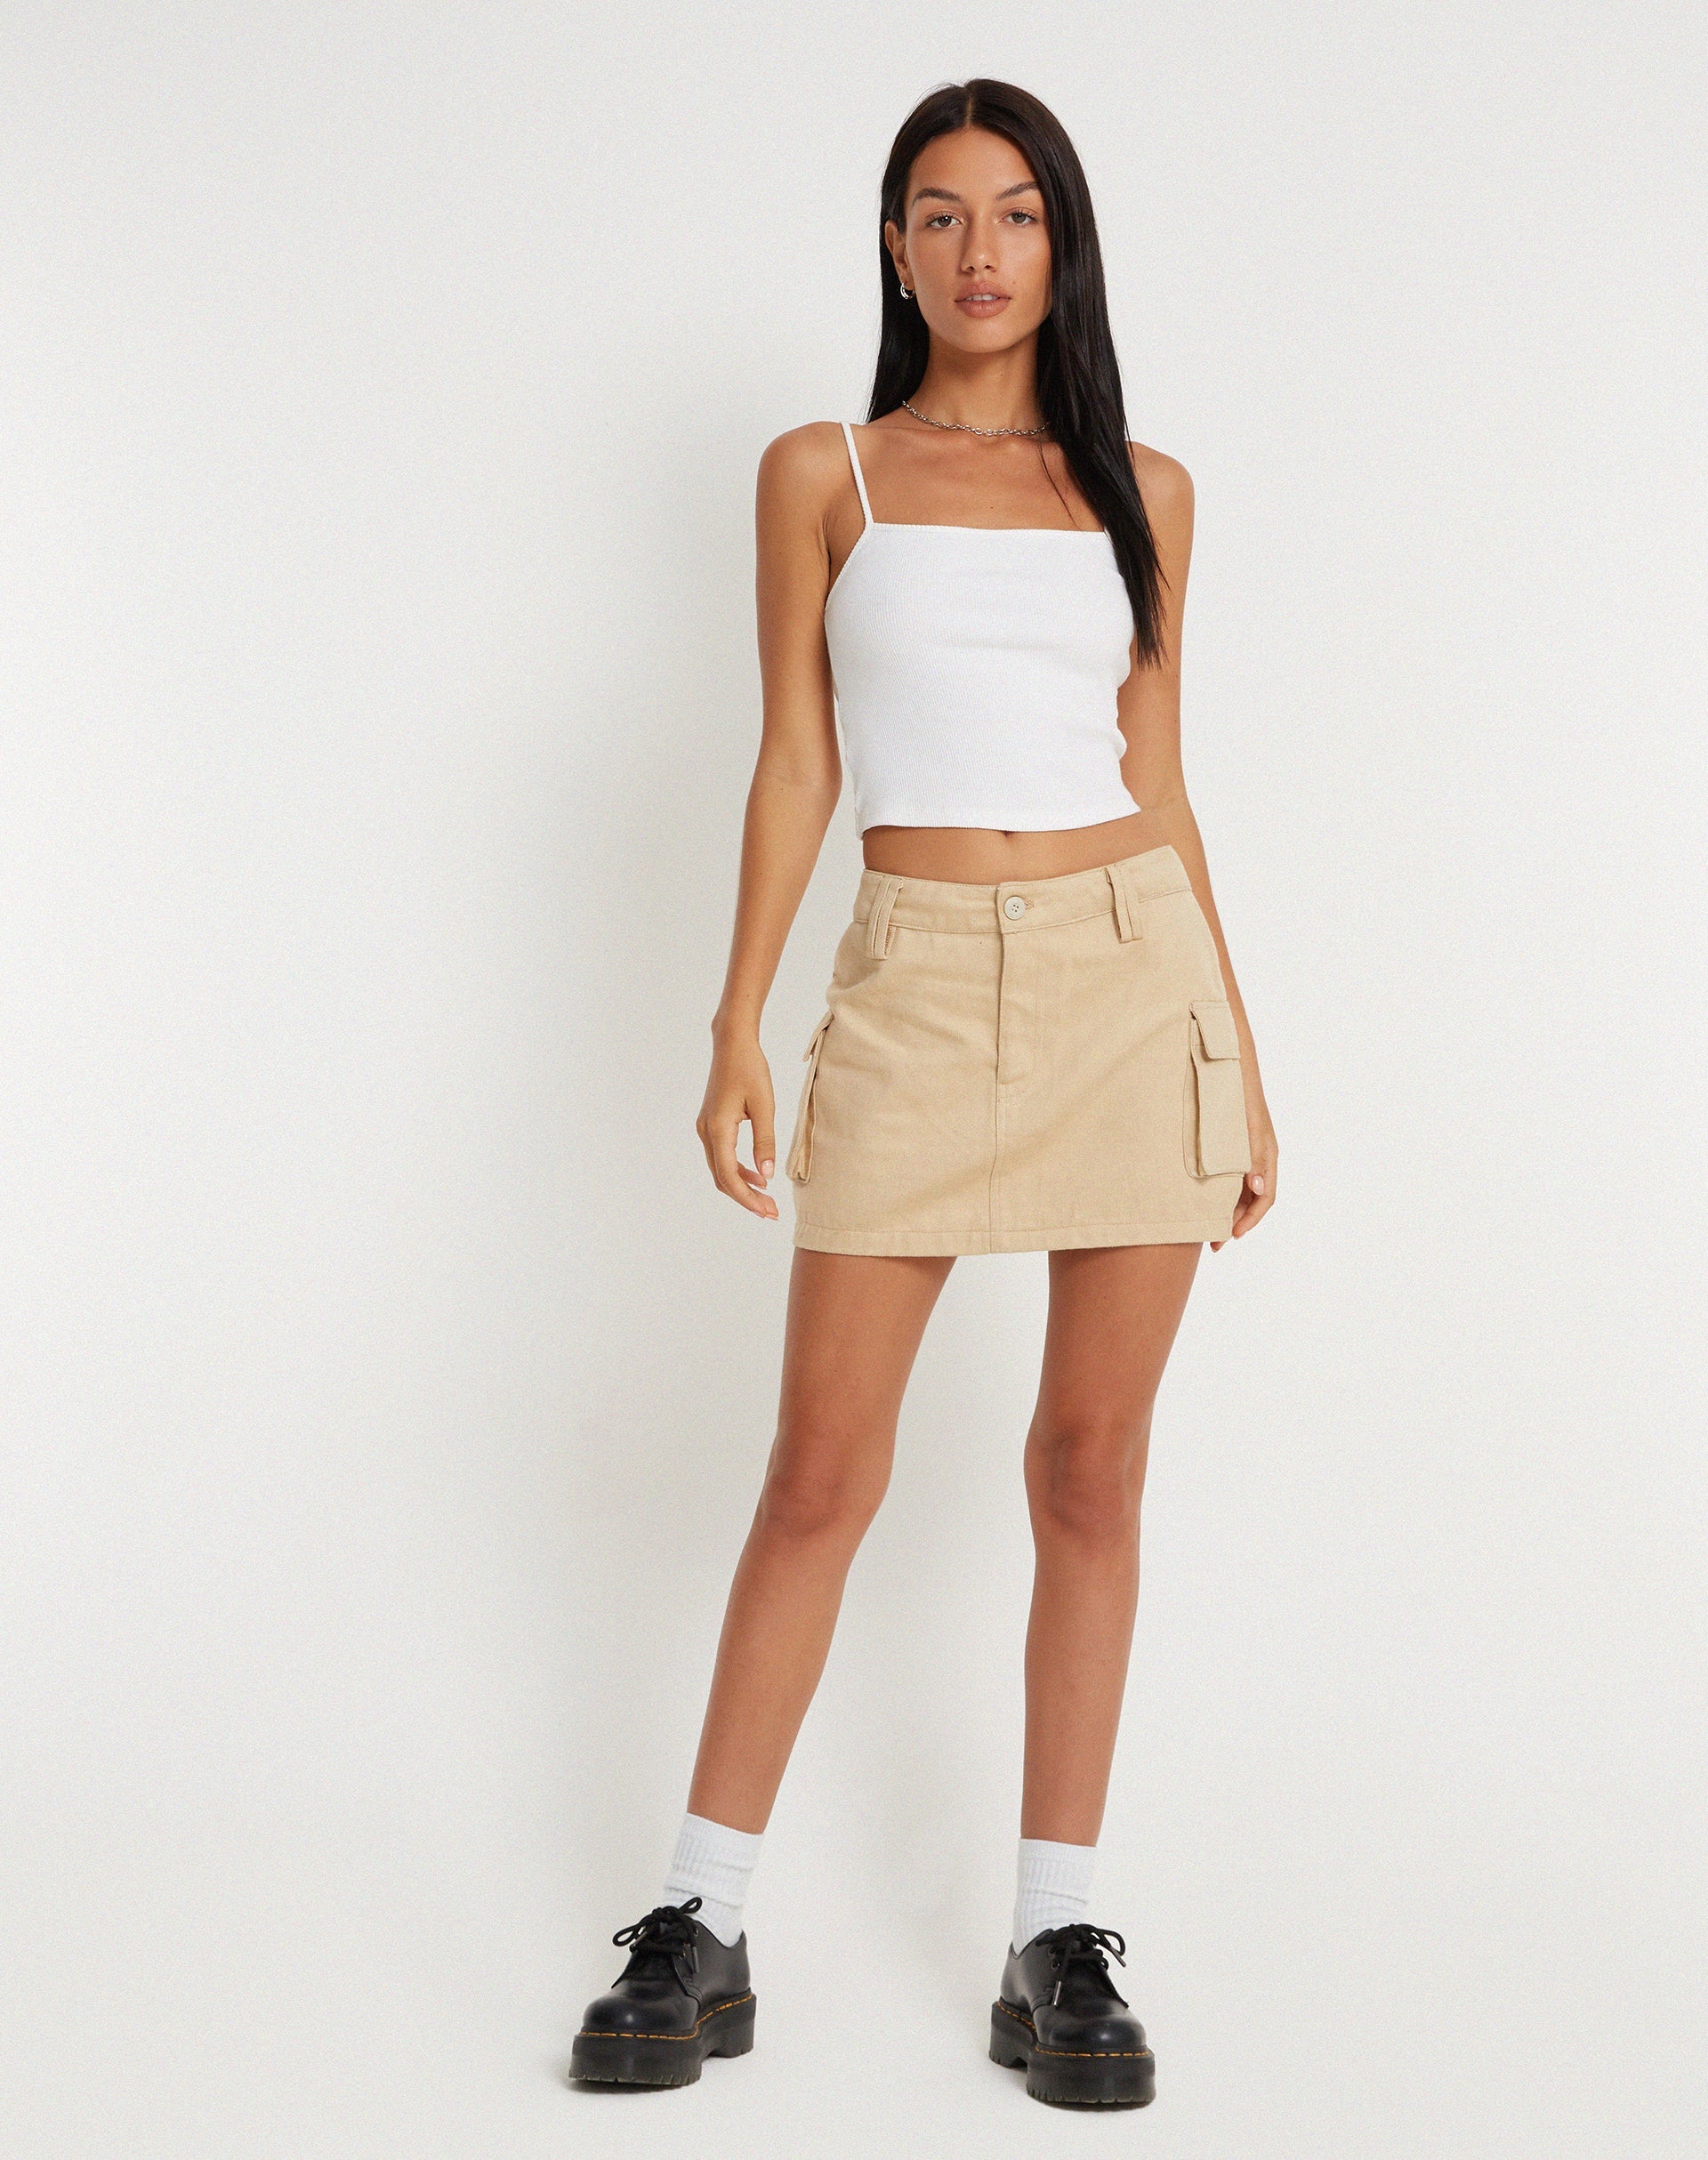 image of Jeng Mini Skirt in Twill Suede Tan